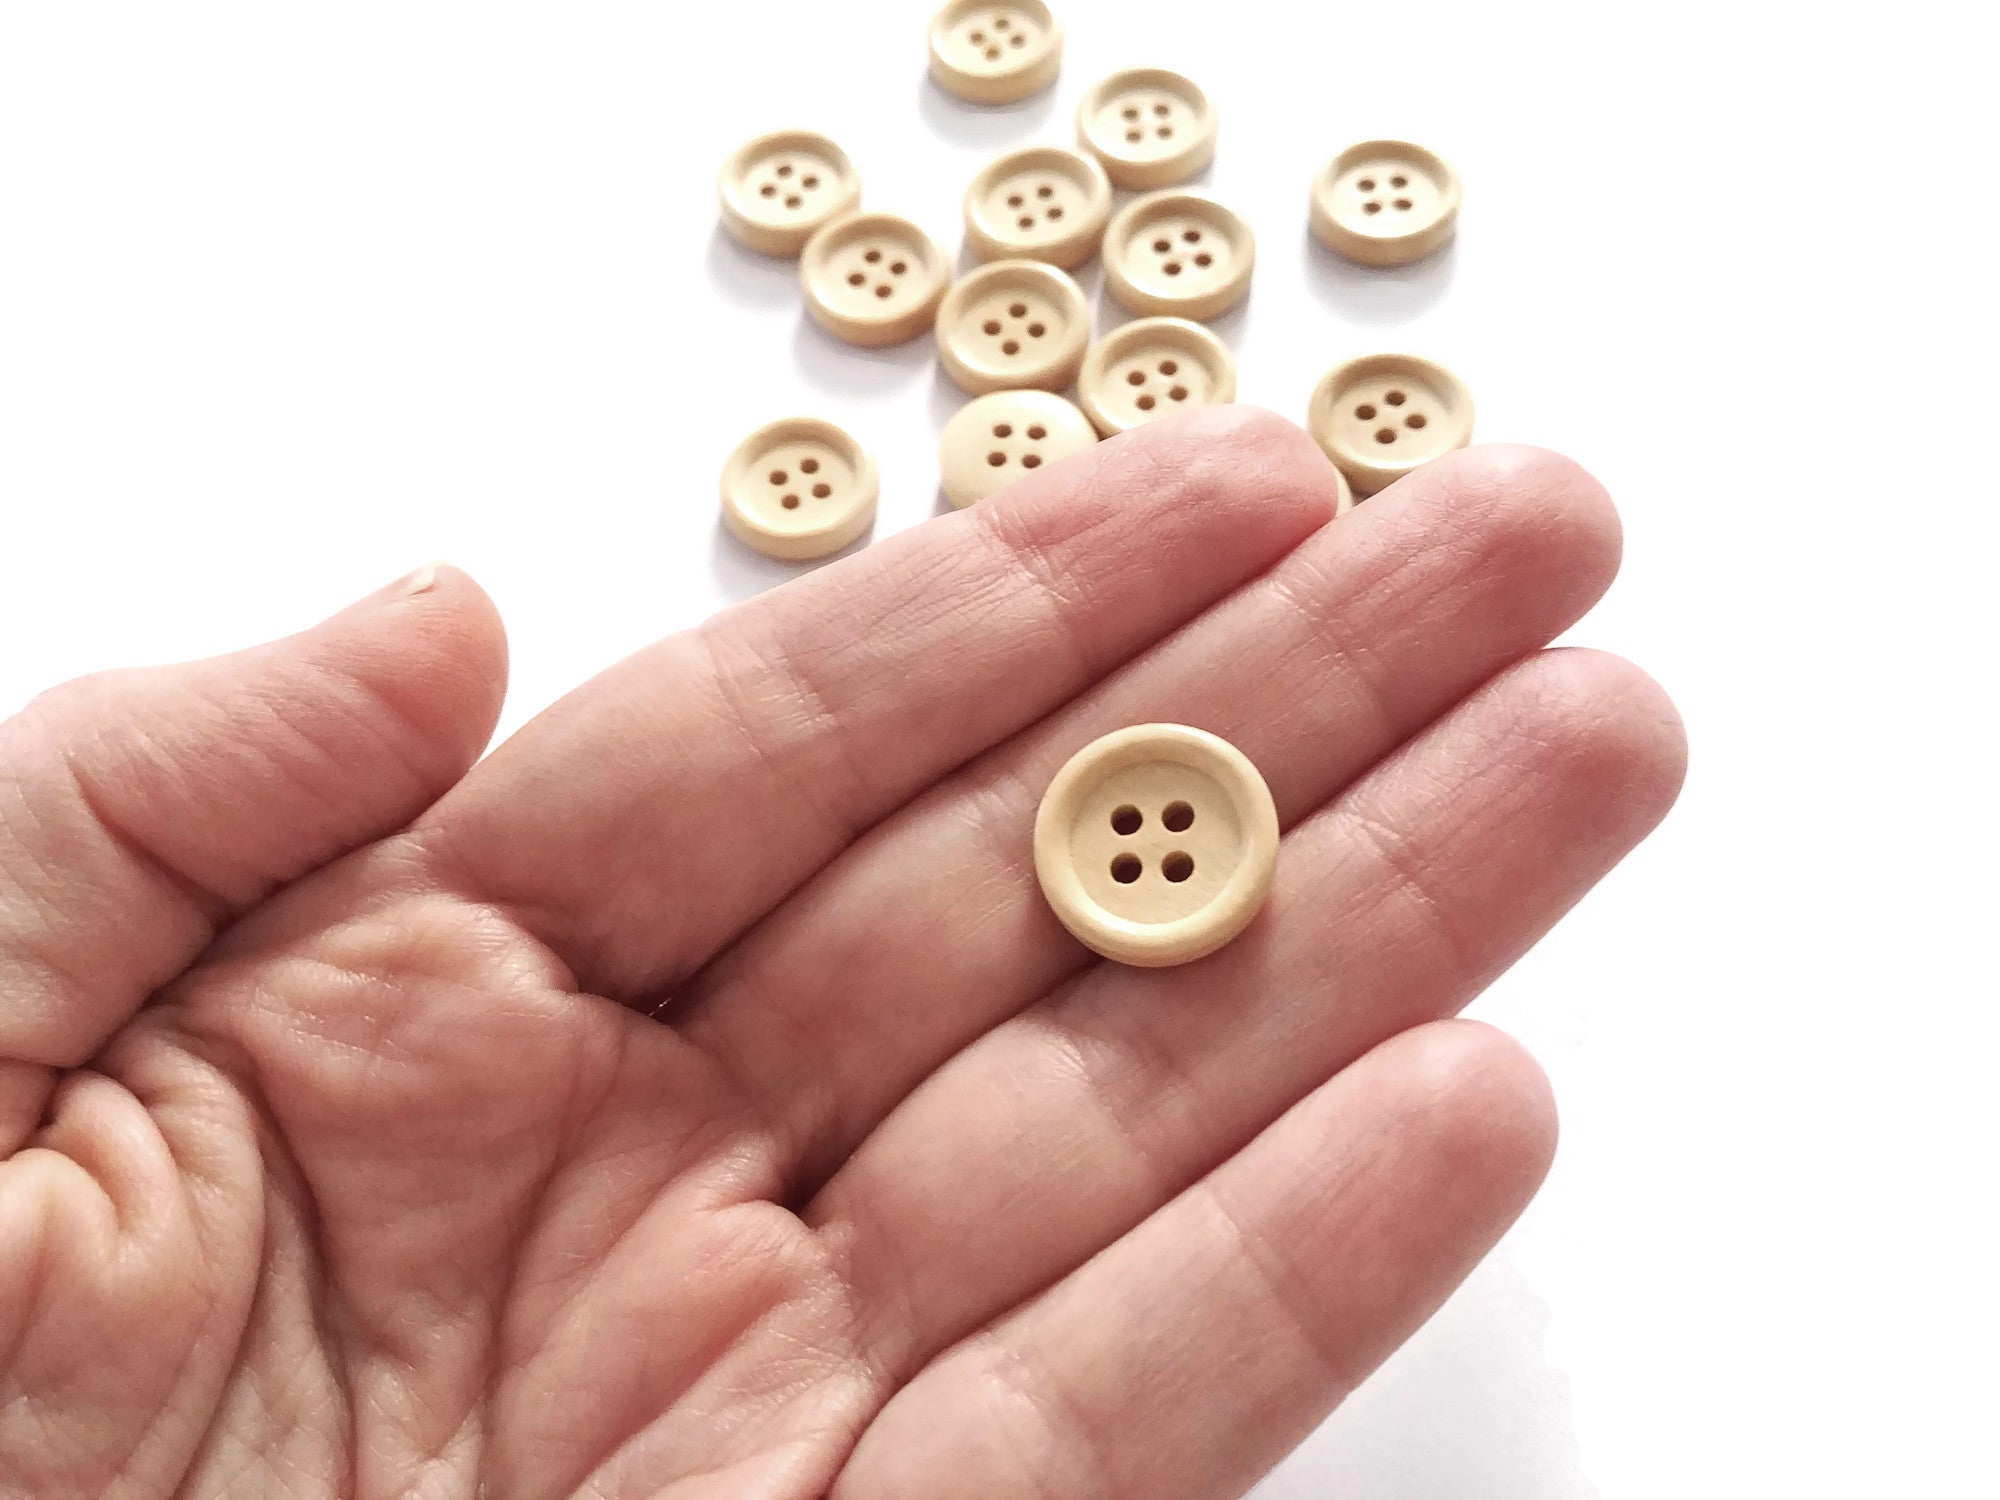 Wooden button - Natural 4 Holes Wood Sewing Buttons 15mm - set of 15 or 60